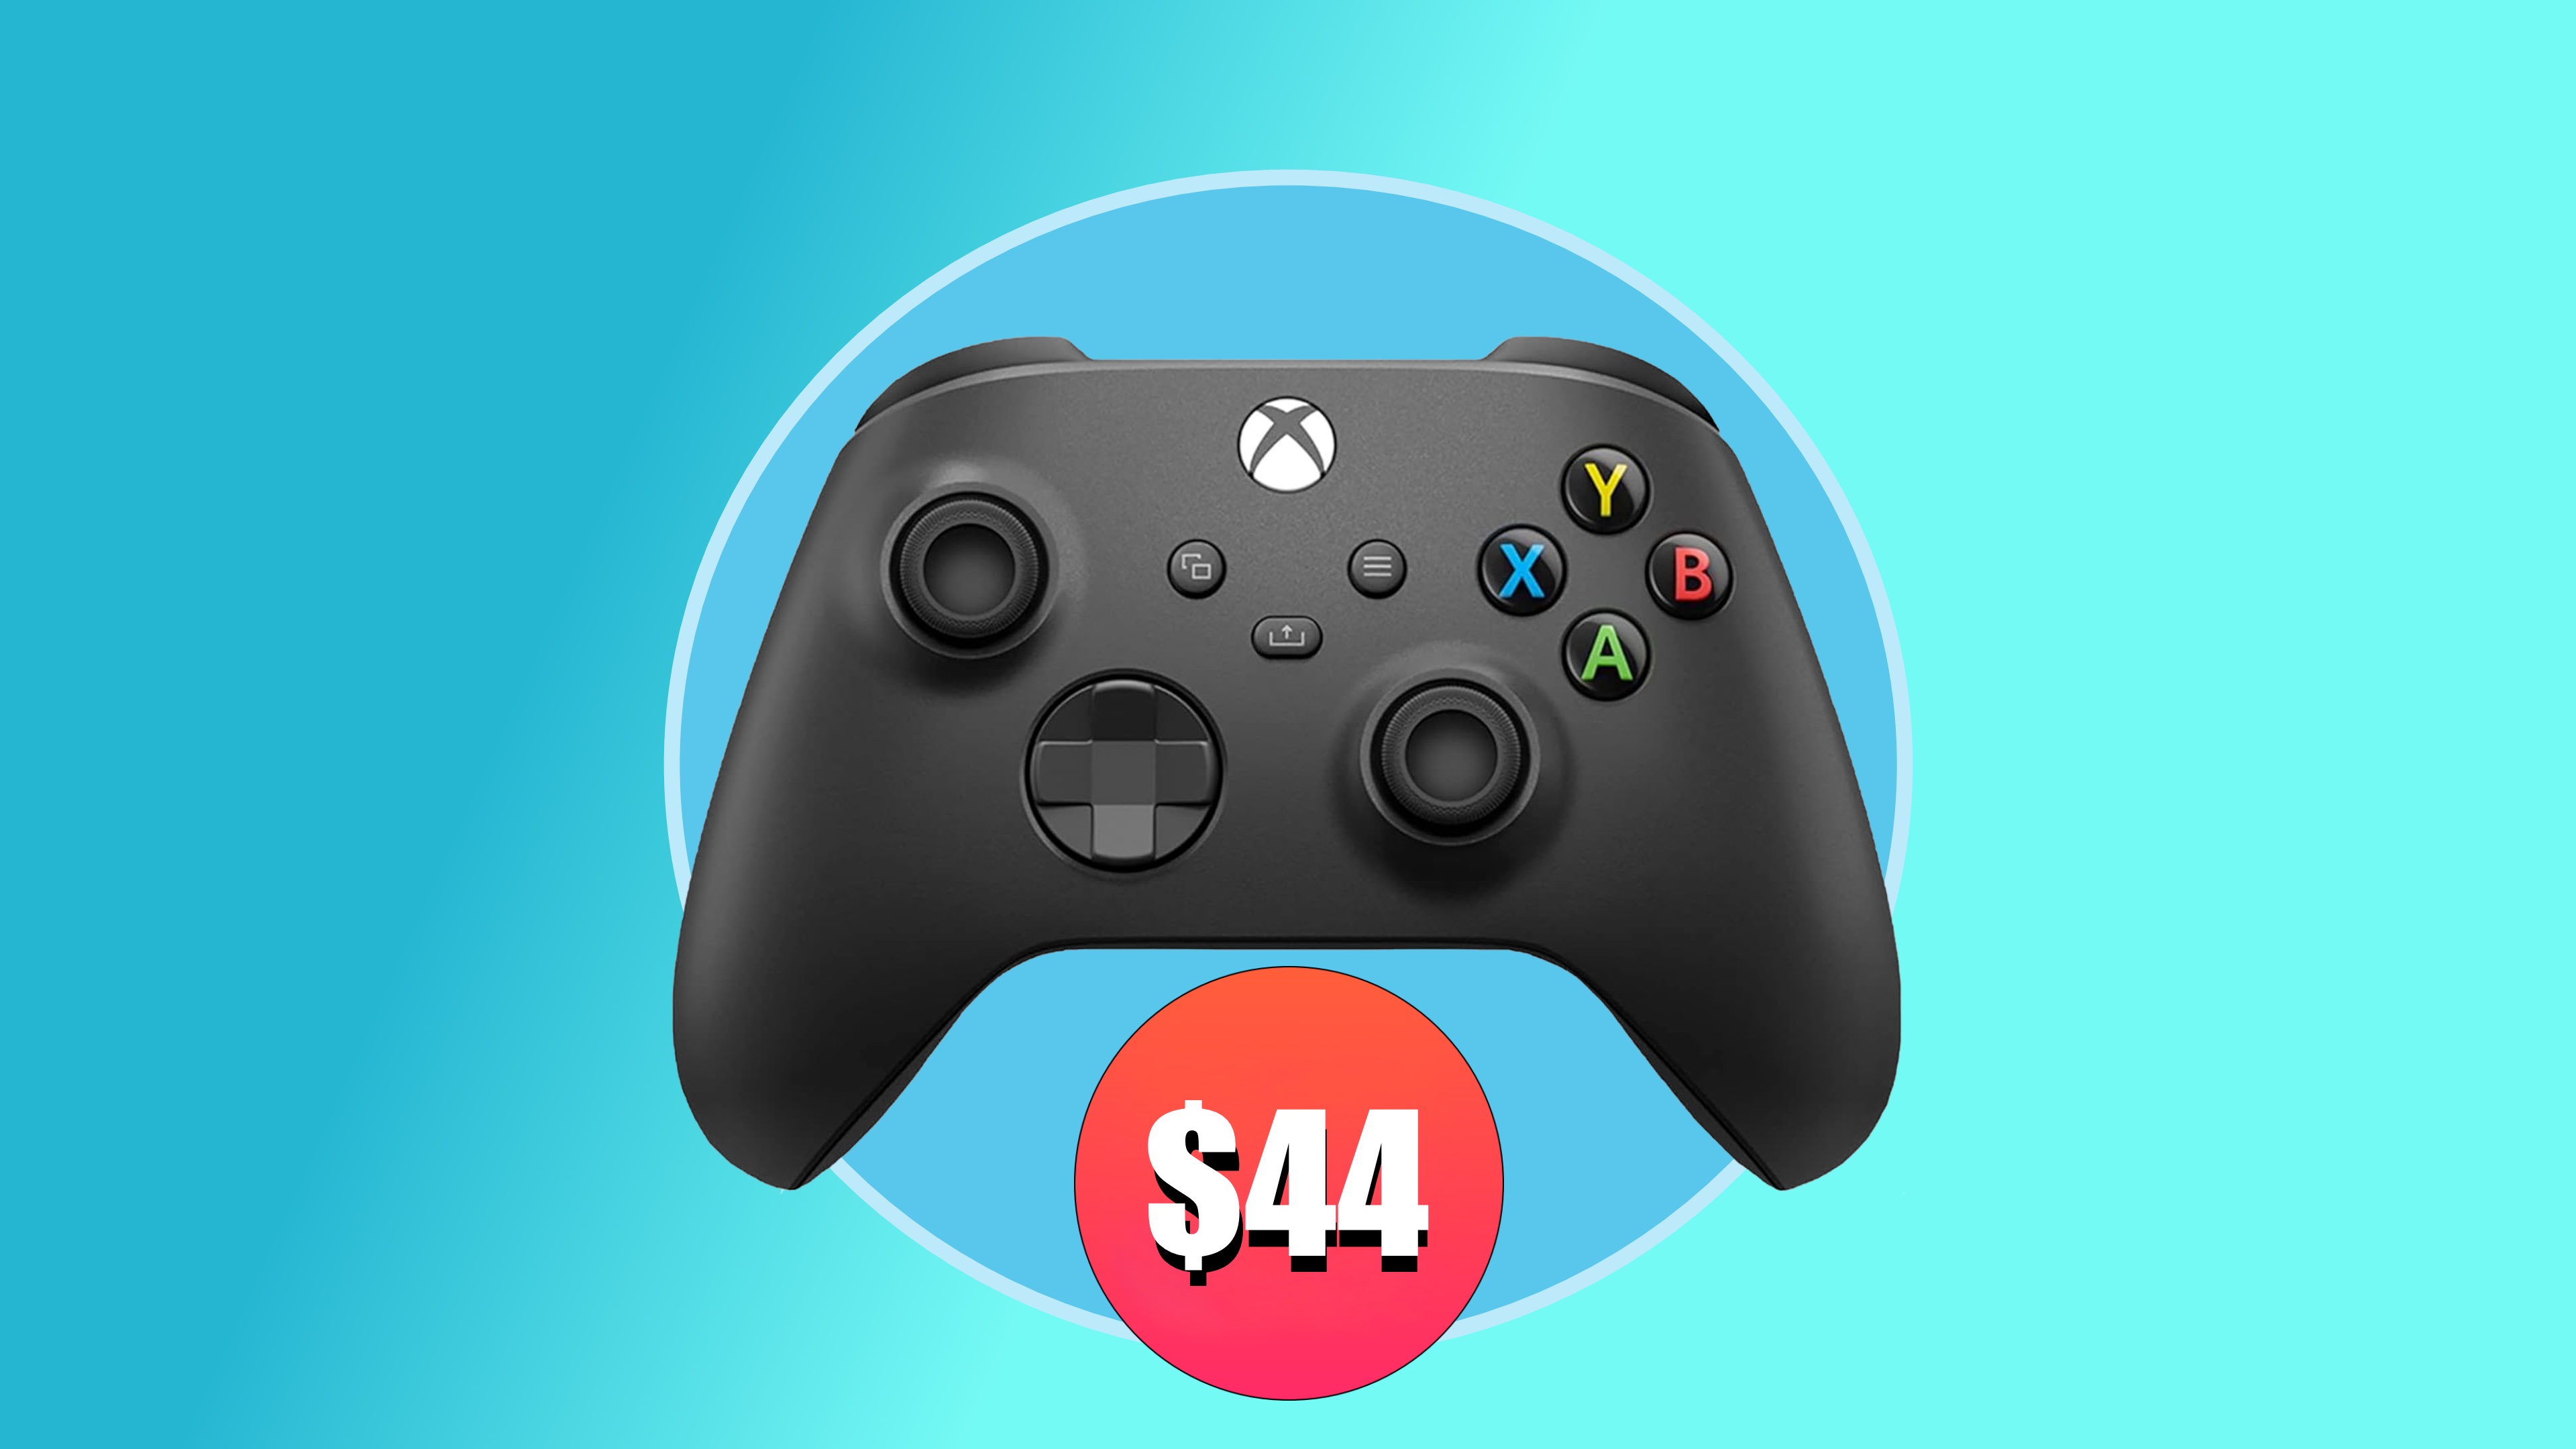 This Xbox Wireless Controller works great for iOS games and is back down to $44